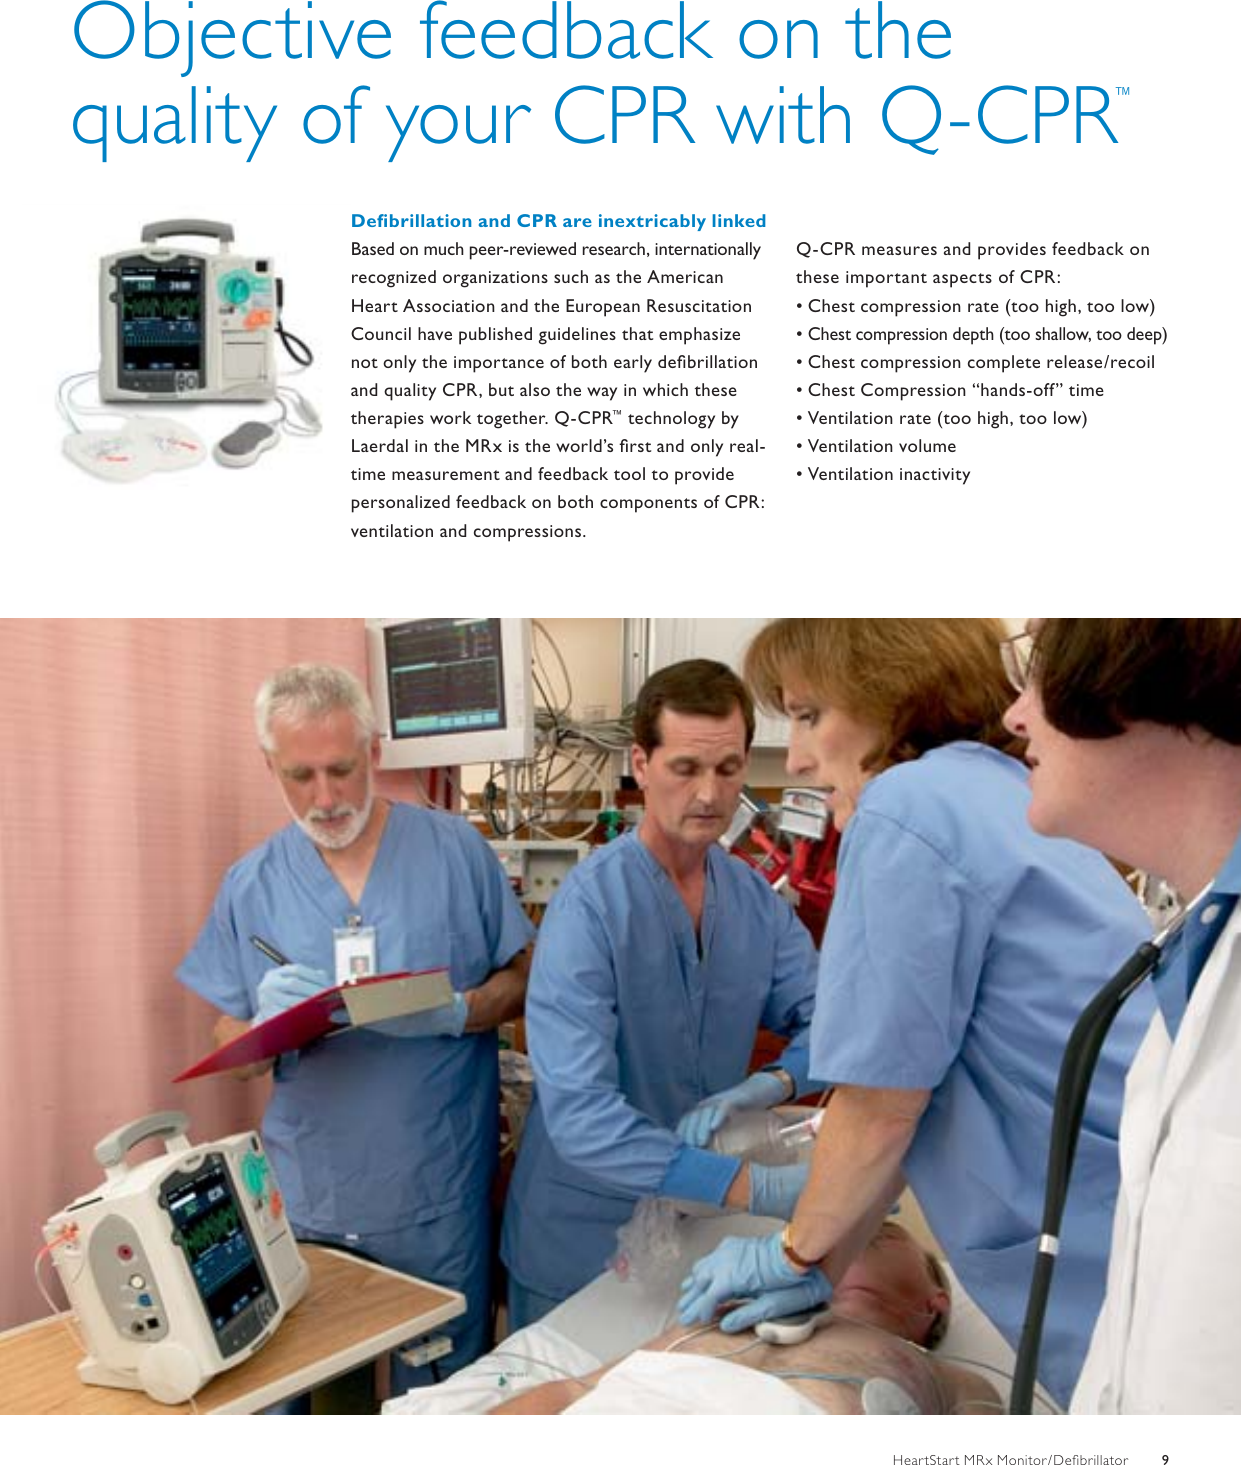 Page 9 of 12 - Philips 4522_962_24371 MRx Monitor/Defibrillator With Q-CPR And Intelli Vue Clinical Network Brochure - Hospital (ENG)